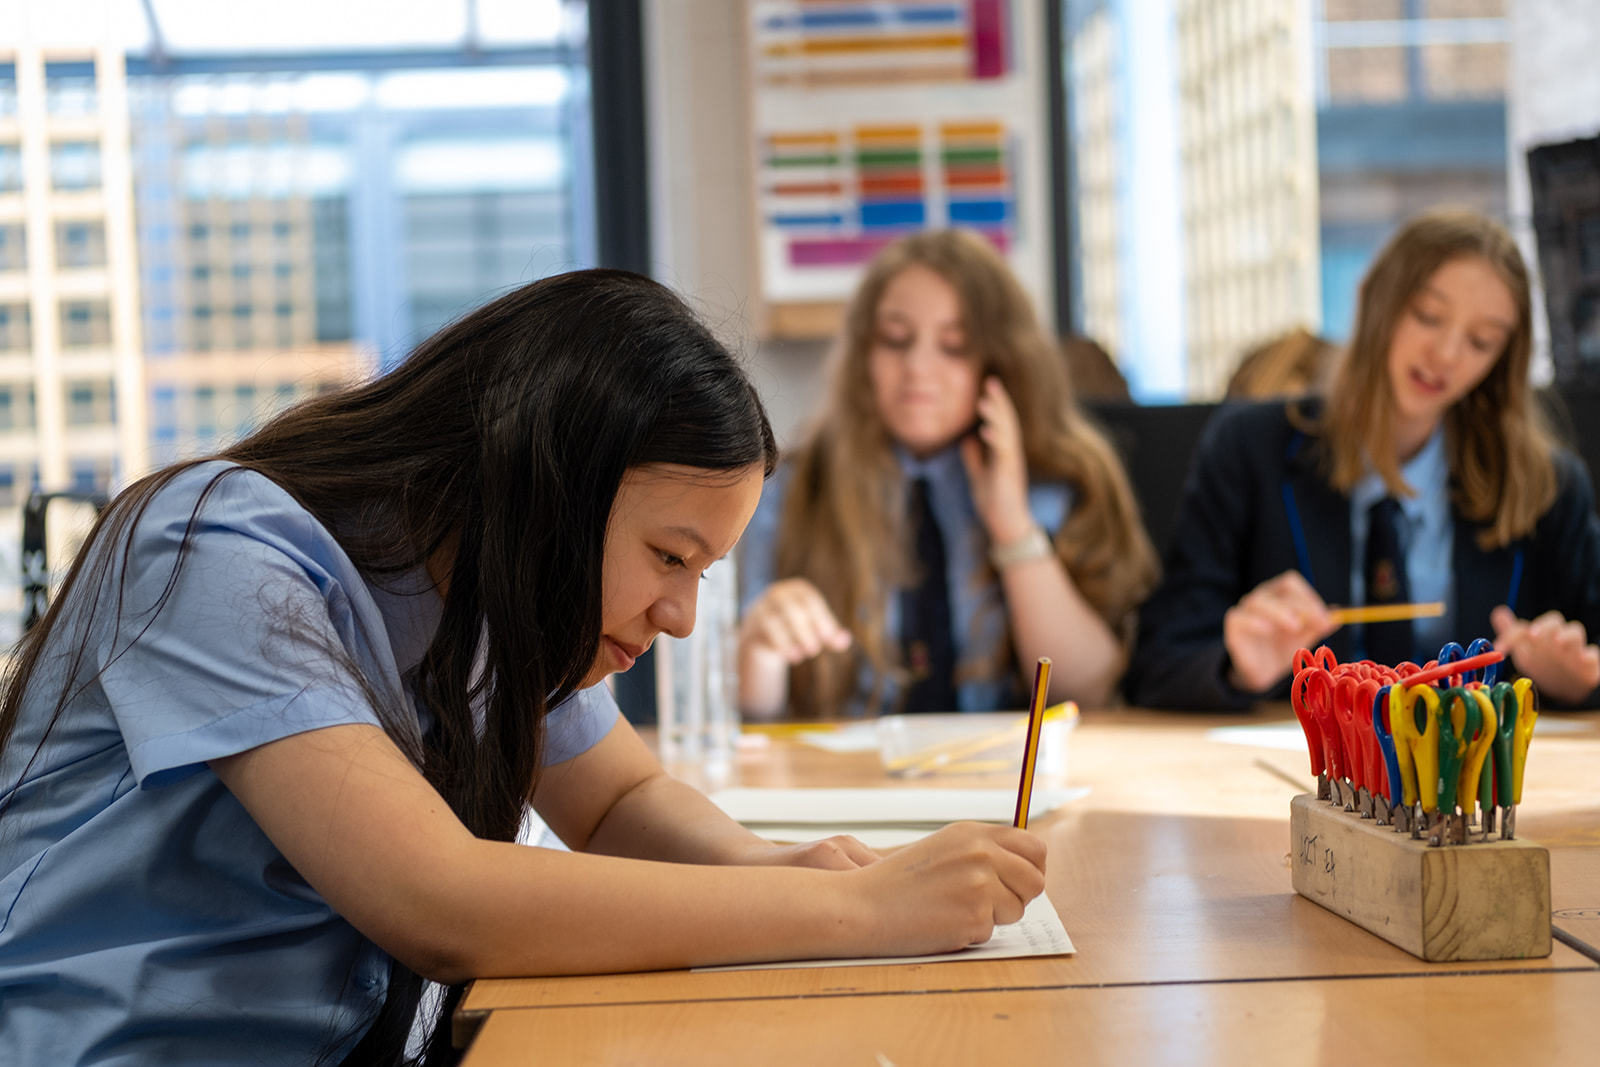 A girl with long dark hair is photographed smiling whilst writing something down in pencil. There are two other students in the background sat at the table.